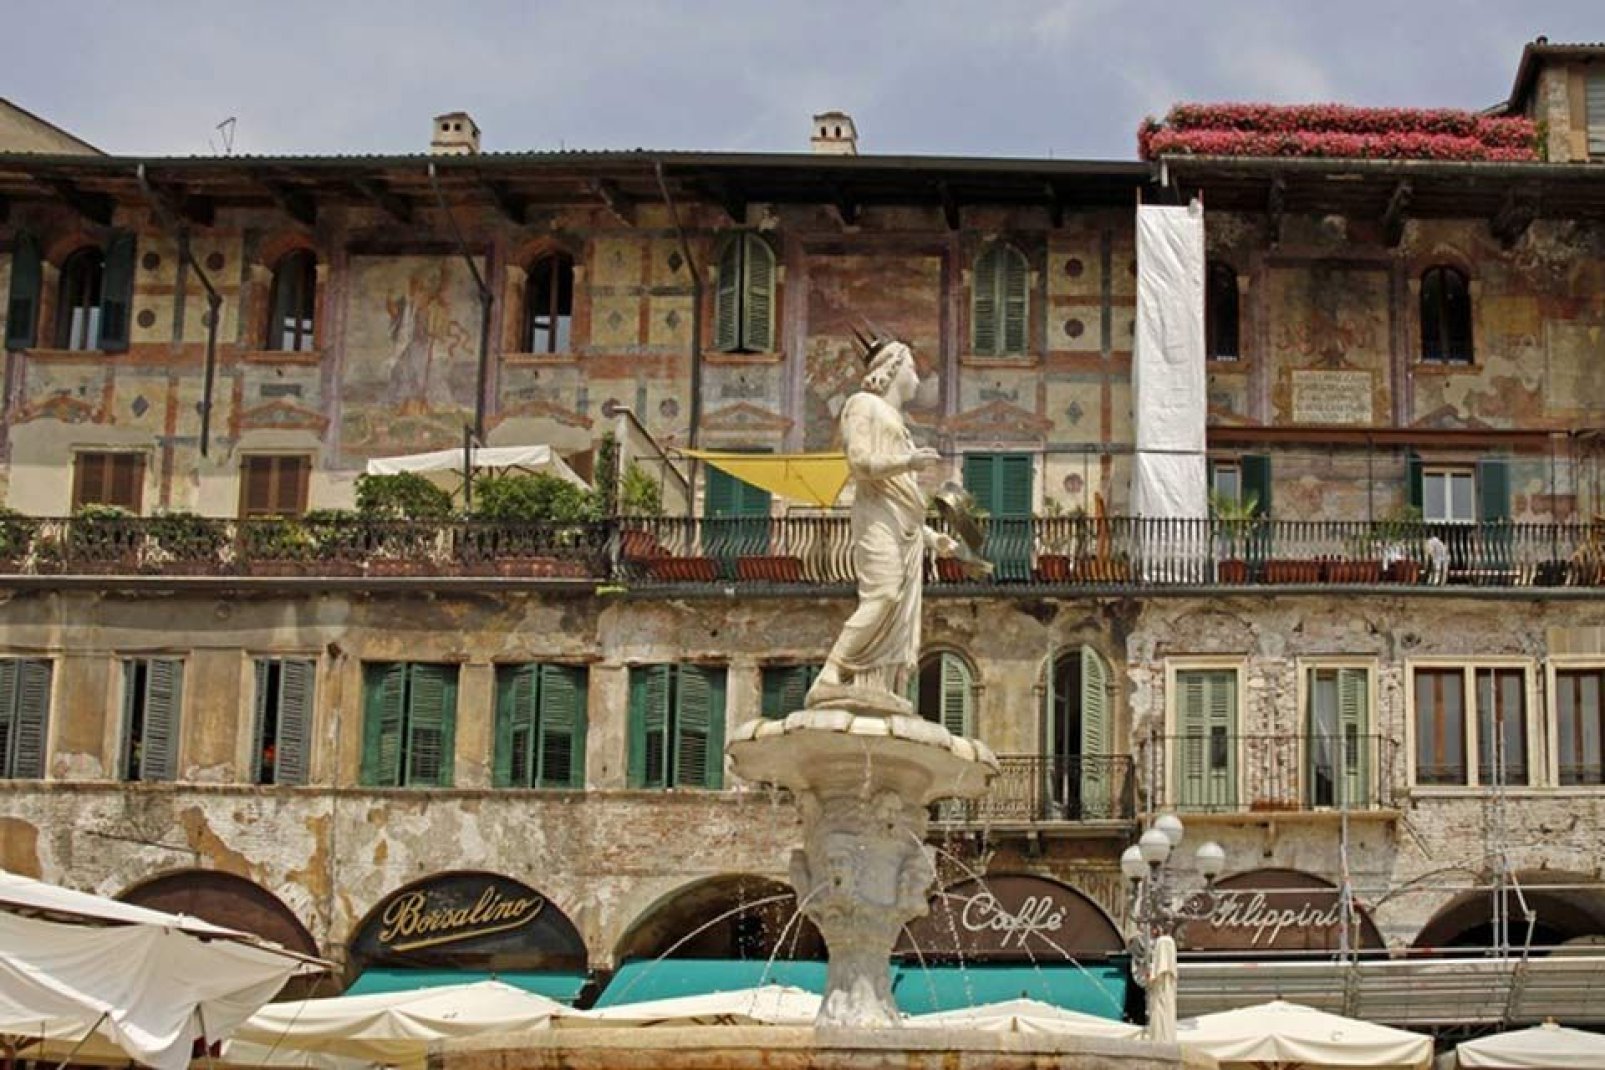 The fountain is the oldest monument in the Piazza.